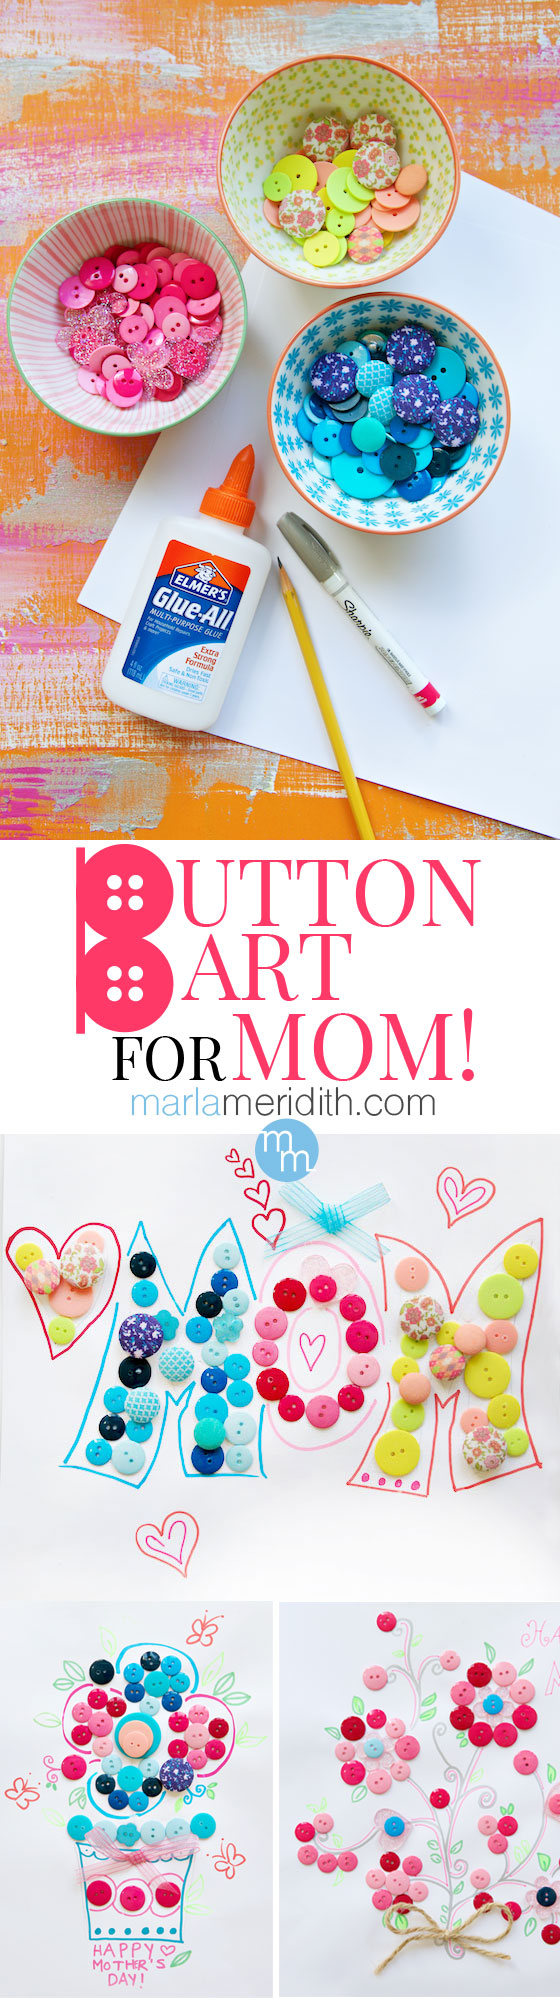 Button Art for MOM, a super cute DIY craft for Mother's Day! MarlaMeridith.com ( @marlameridith )